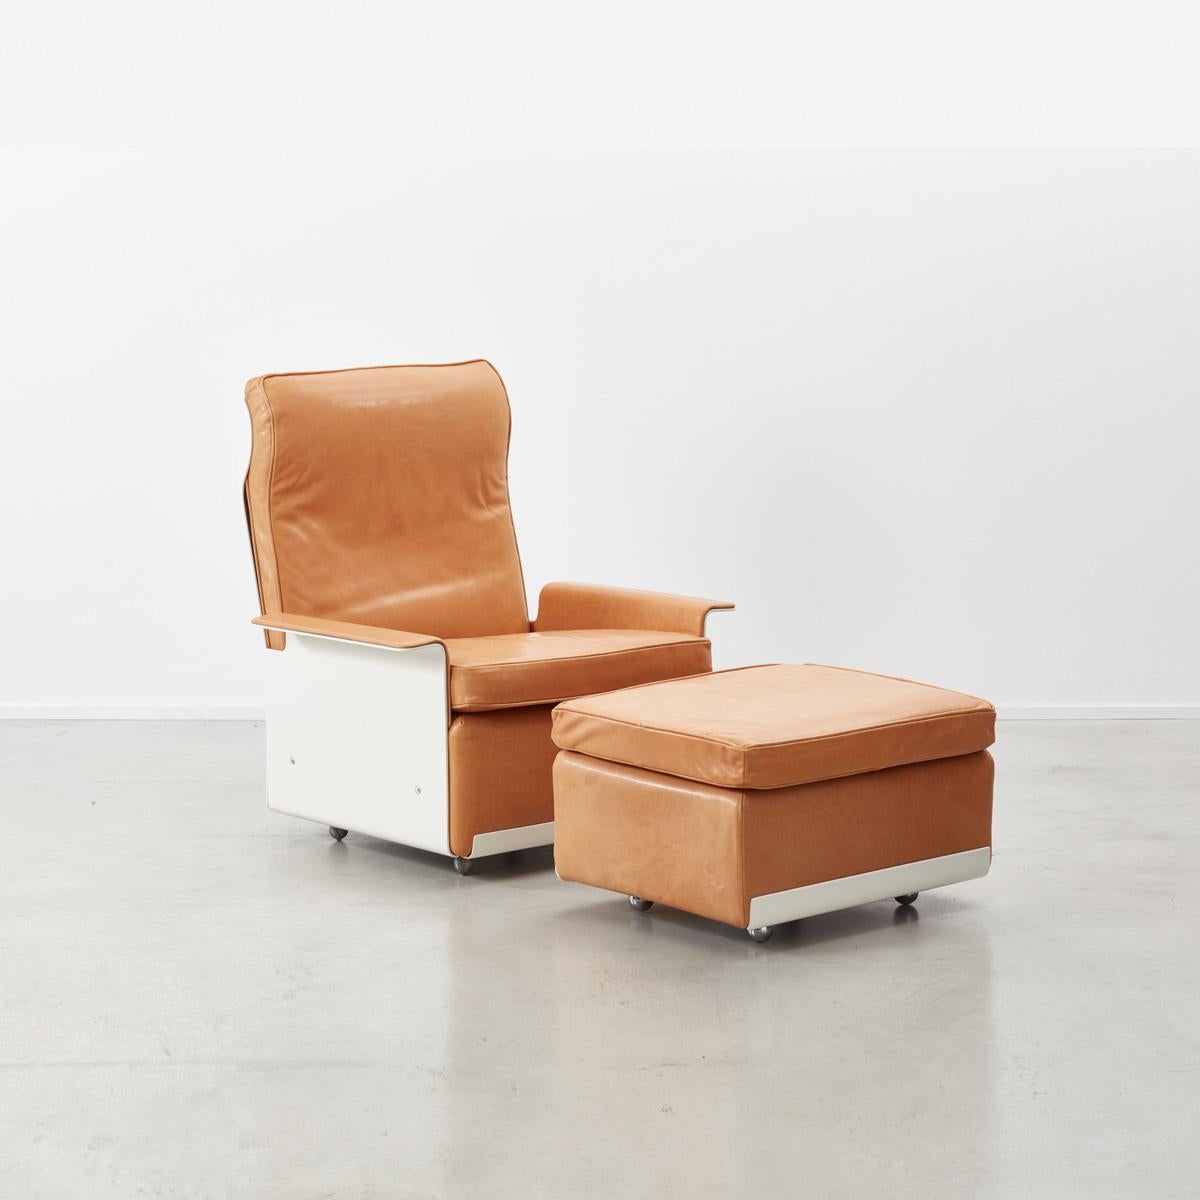 Dieter Rams 620 armchair and footstool, designed for Vitsoe in 1962. 
Newly reupholstered in buttery soft full grain aniline leather in a pale tan. Leather has a natural finish, with a slight nubuck feel. Will mark and patina with time. Frame,